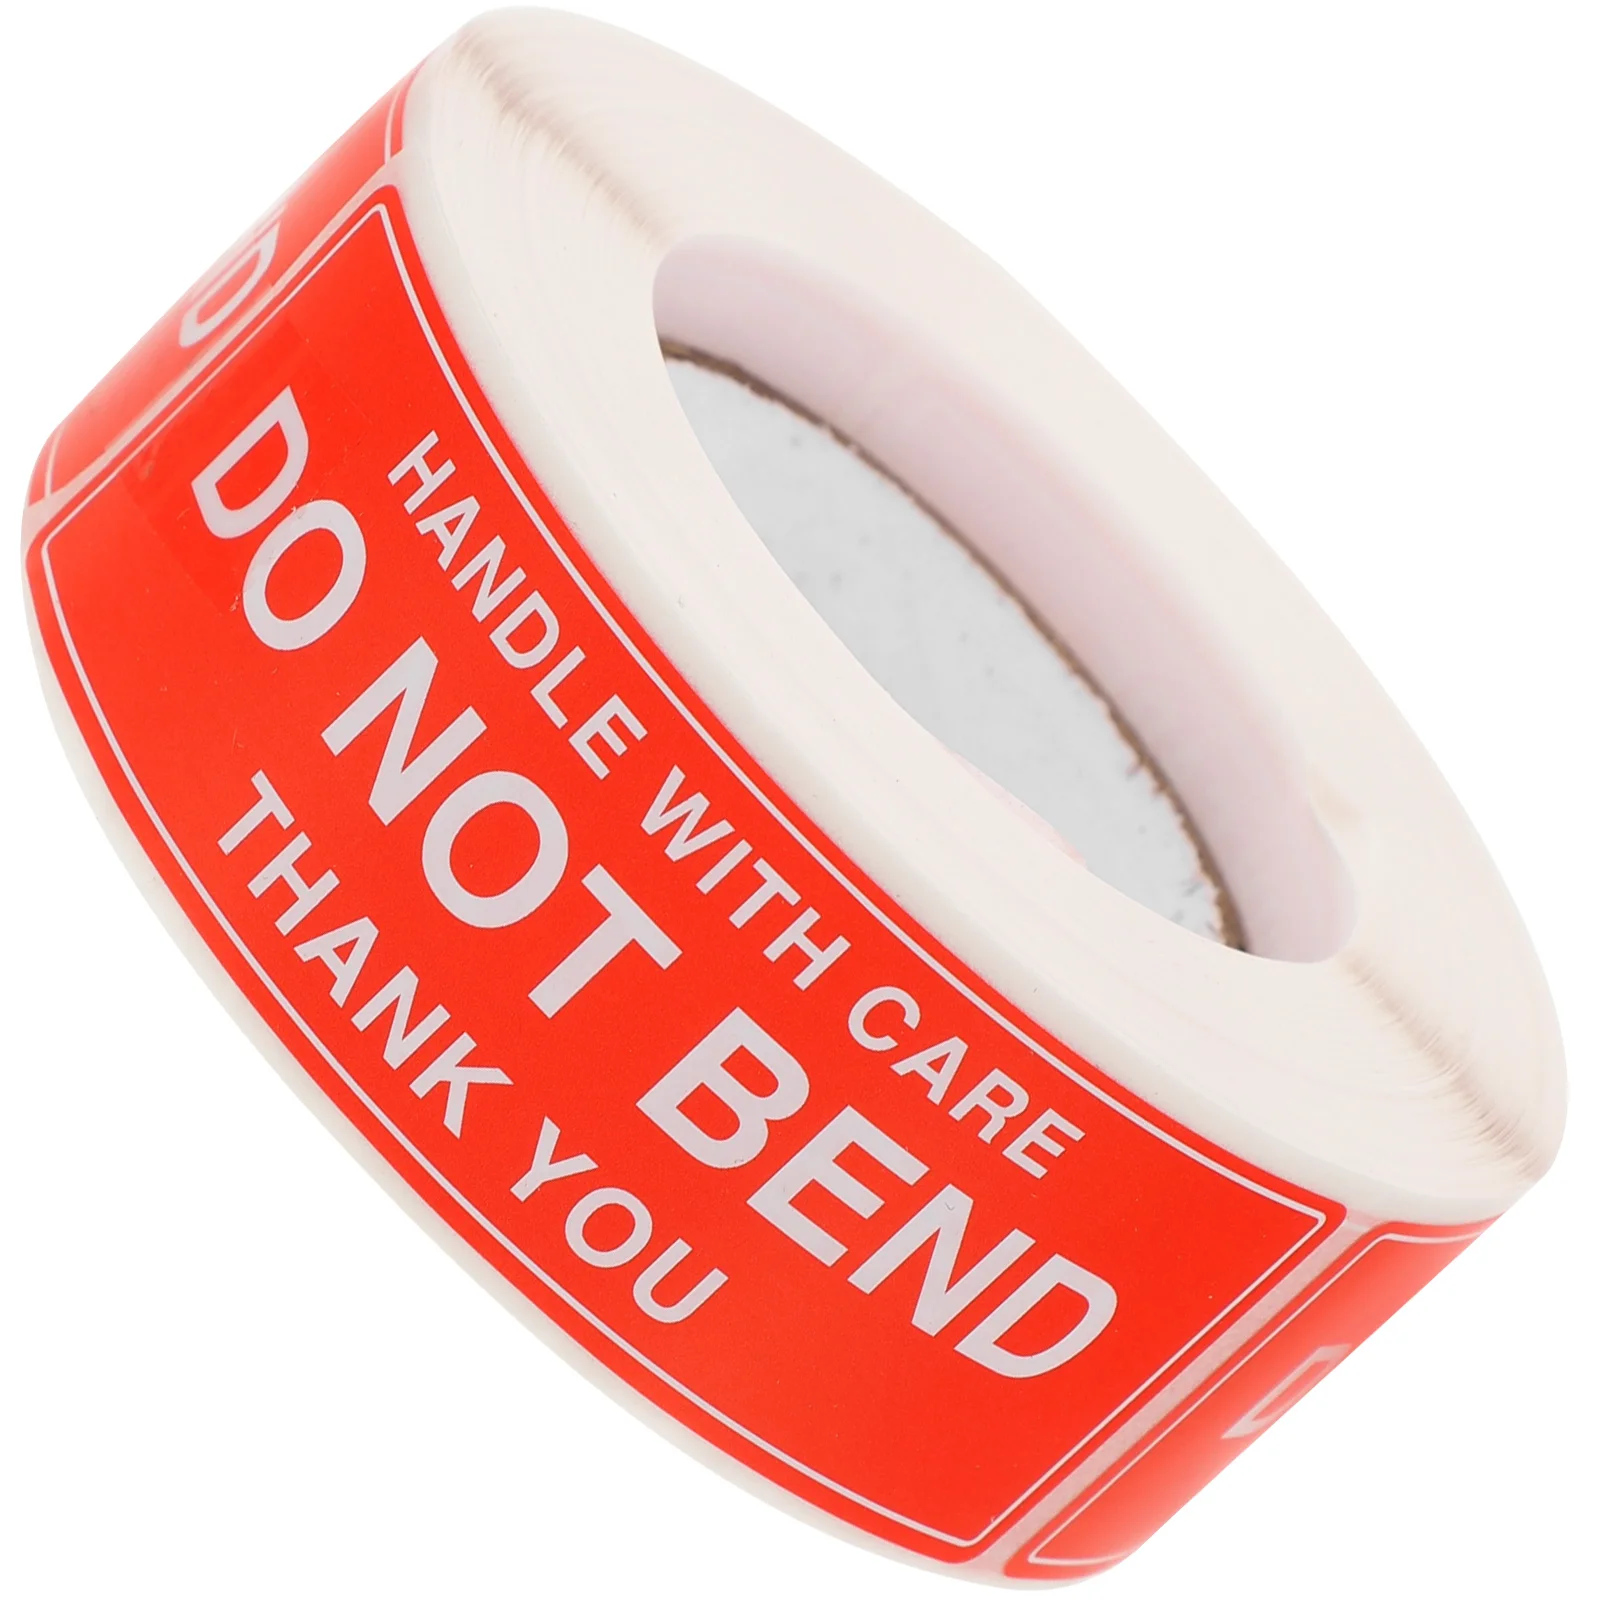 

Do Not Bend The Label Shipping Package Warning Decals Adhesive Sticker Packing Stickers Caution Labels